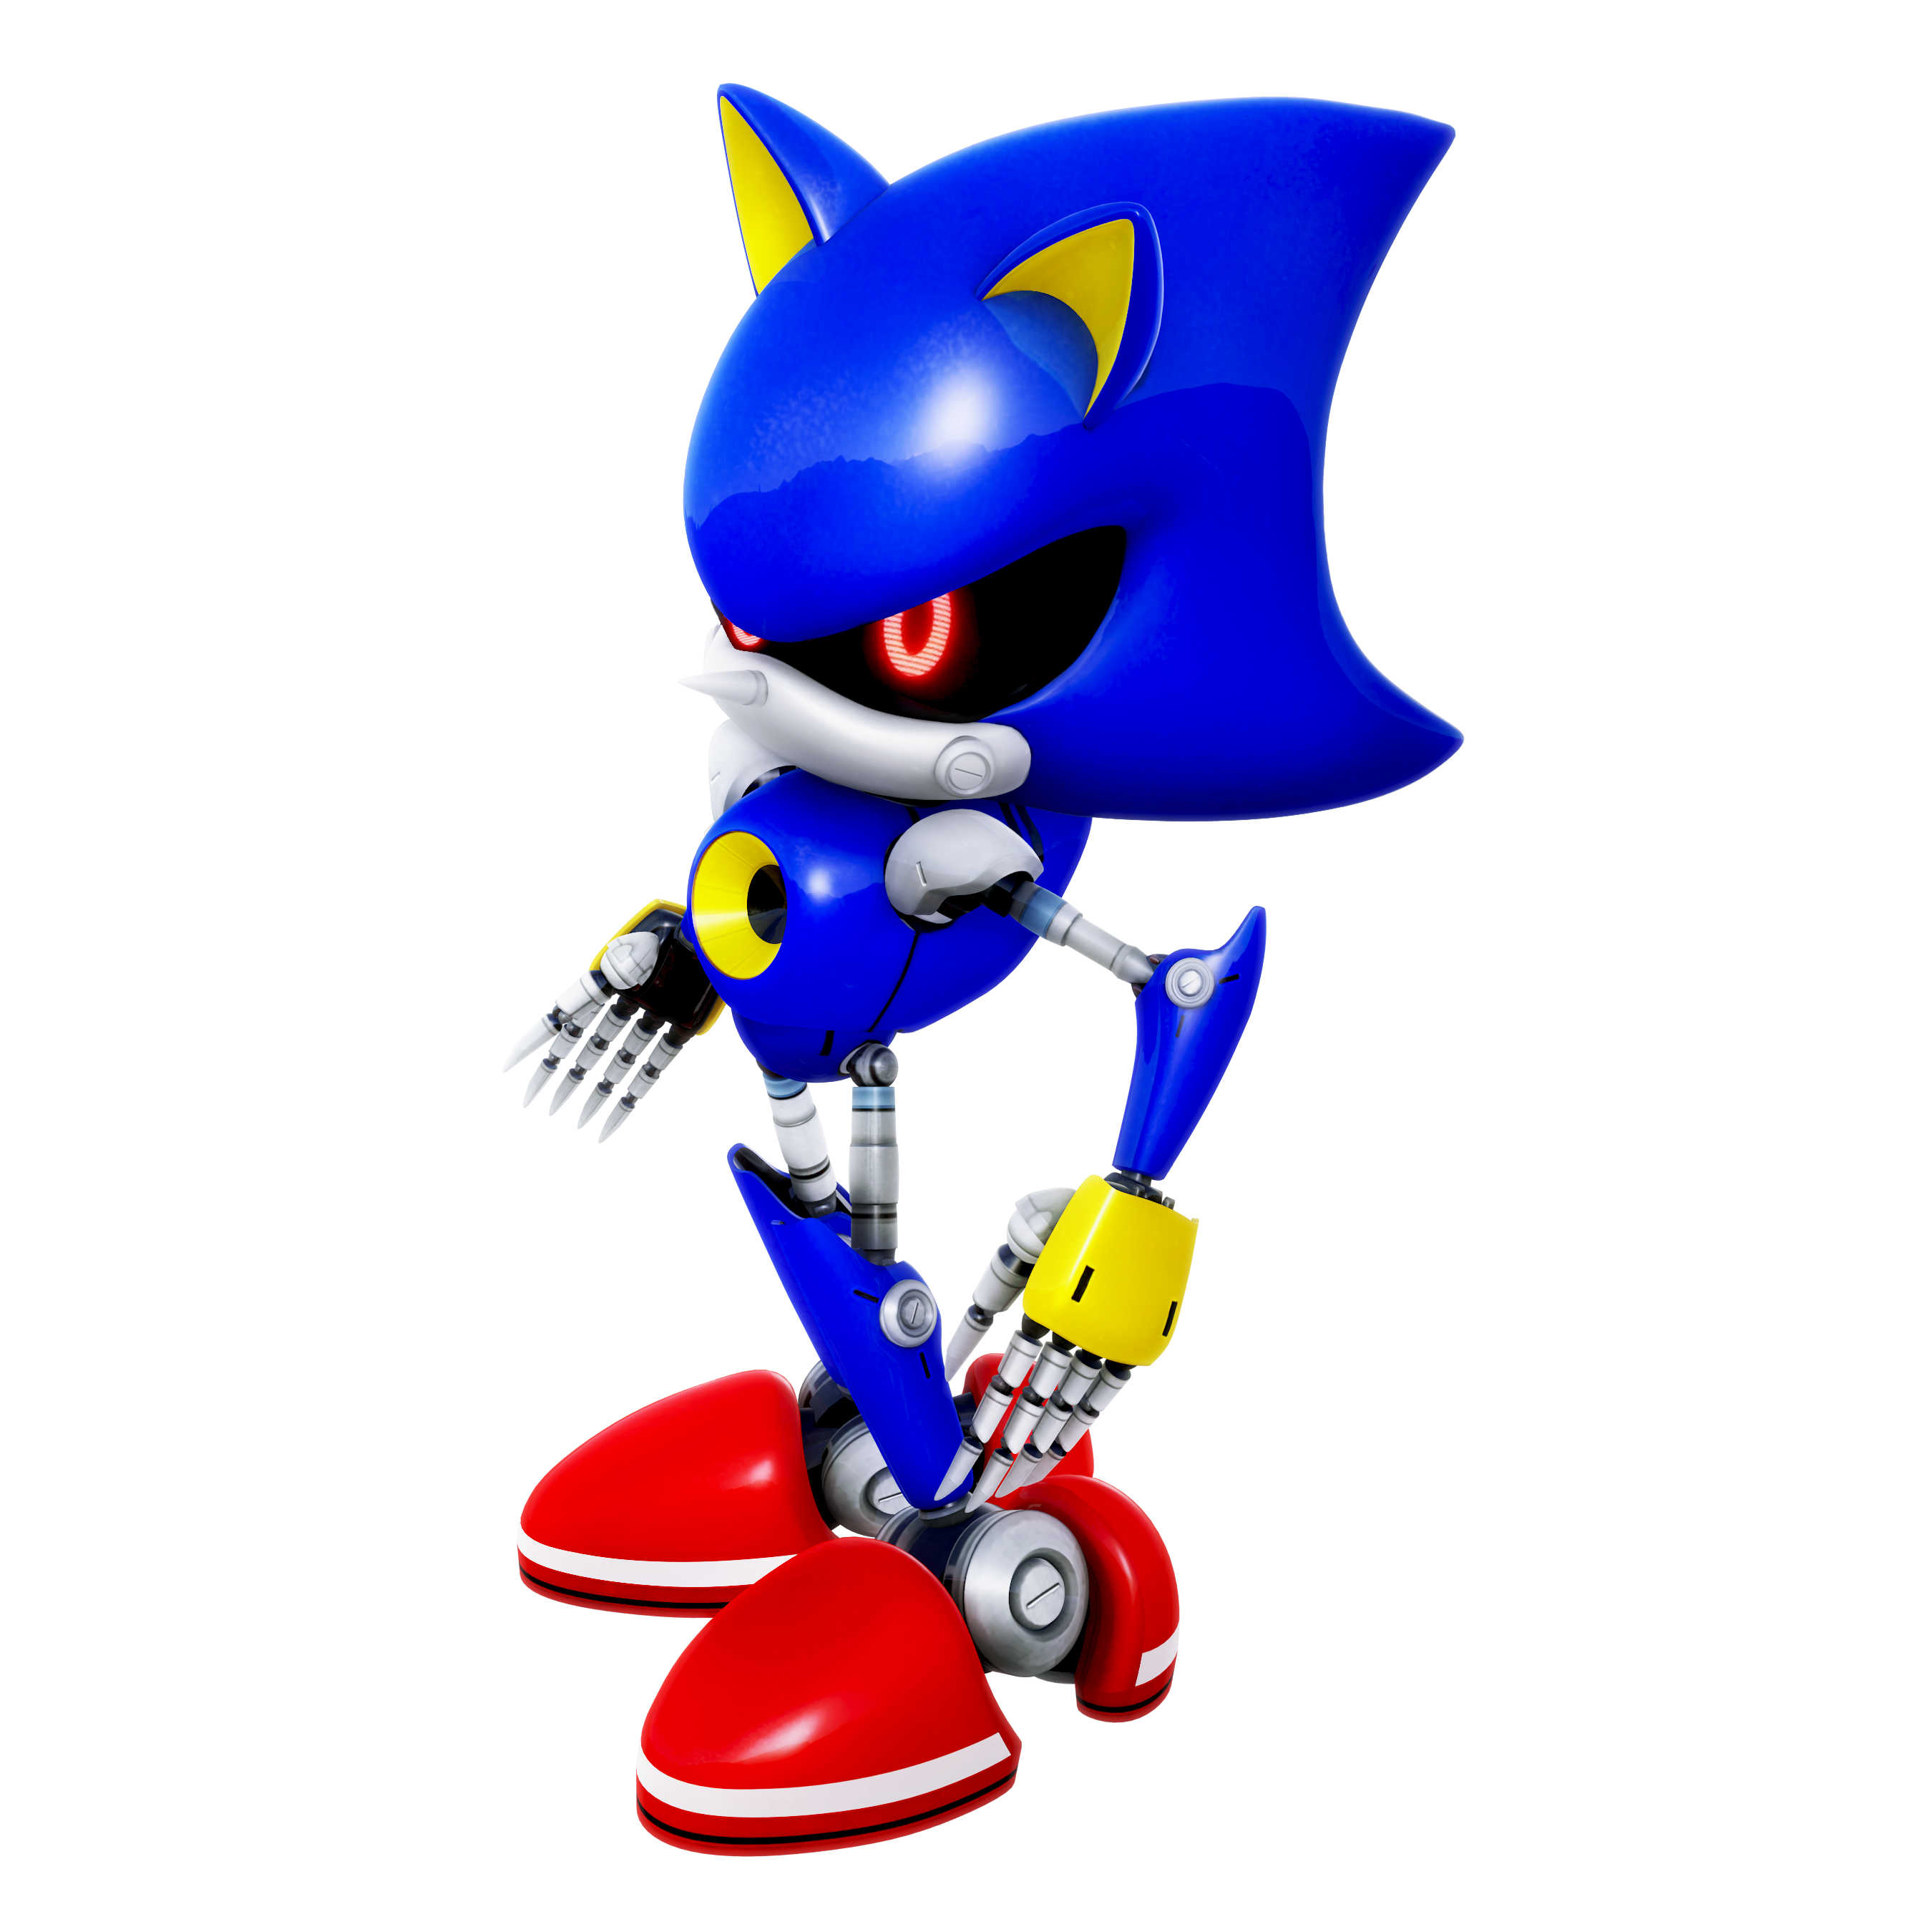 Does Metal Sonic scale to Uni+ - Low Multi Super Sonic?